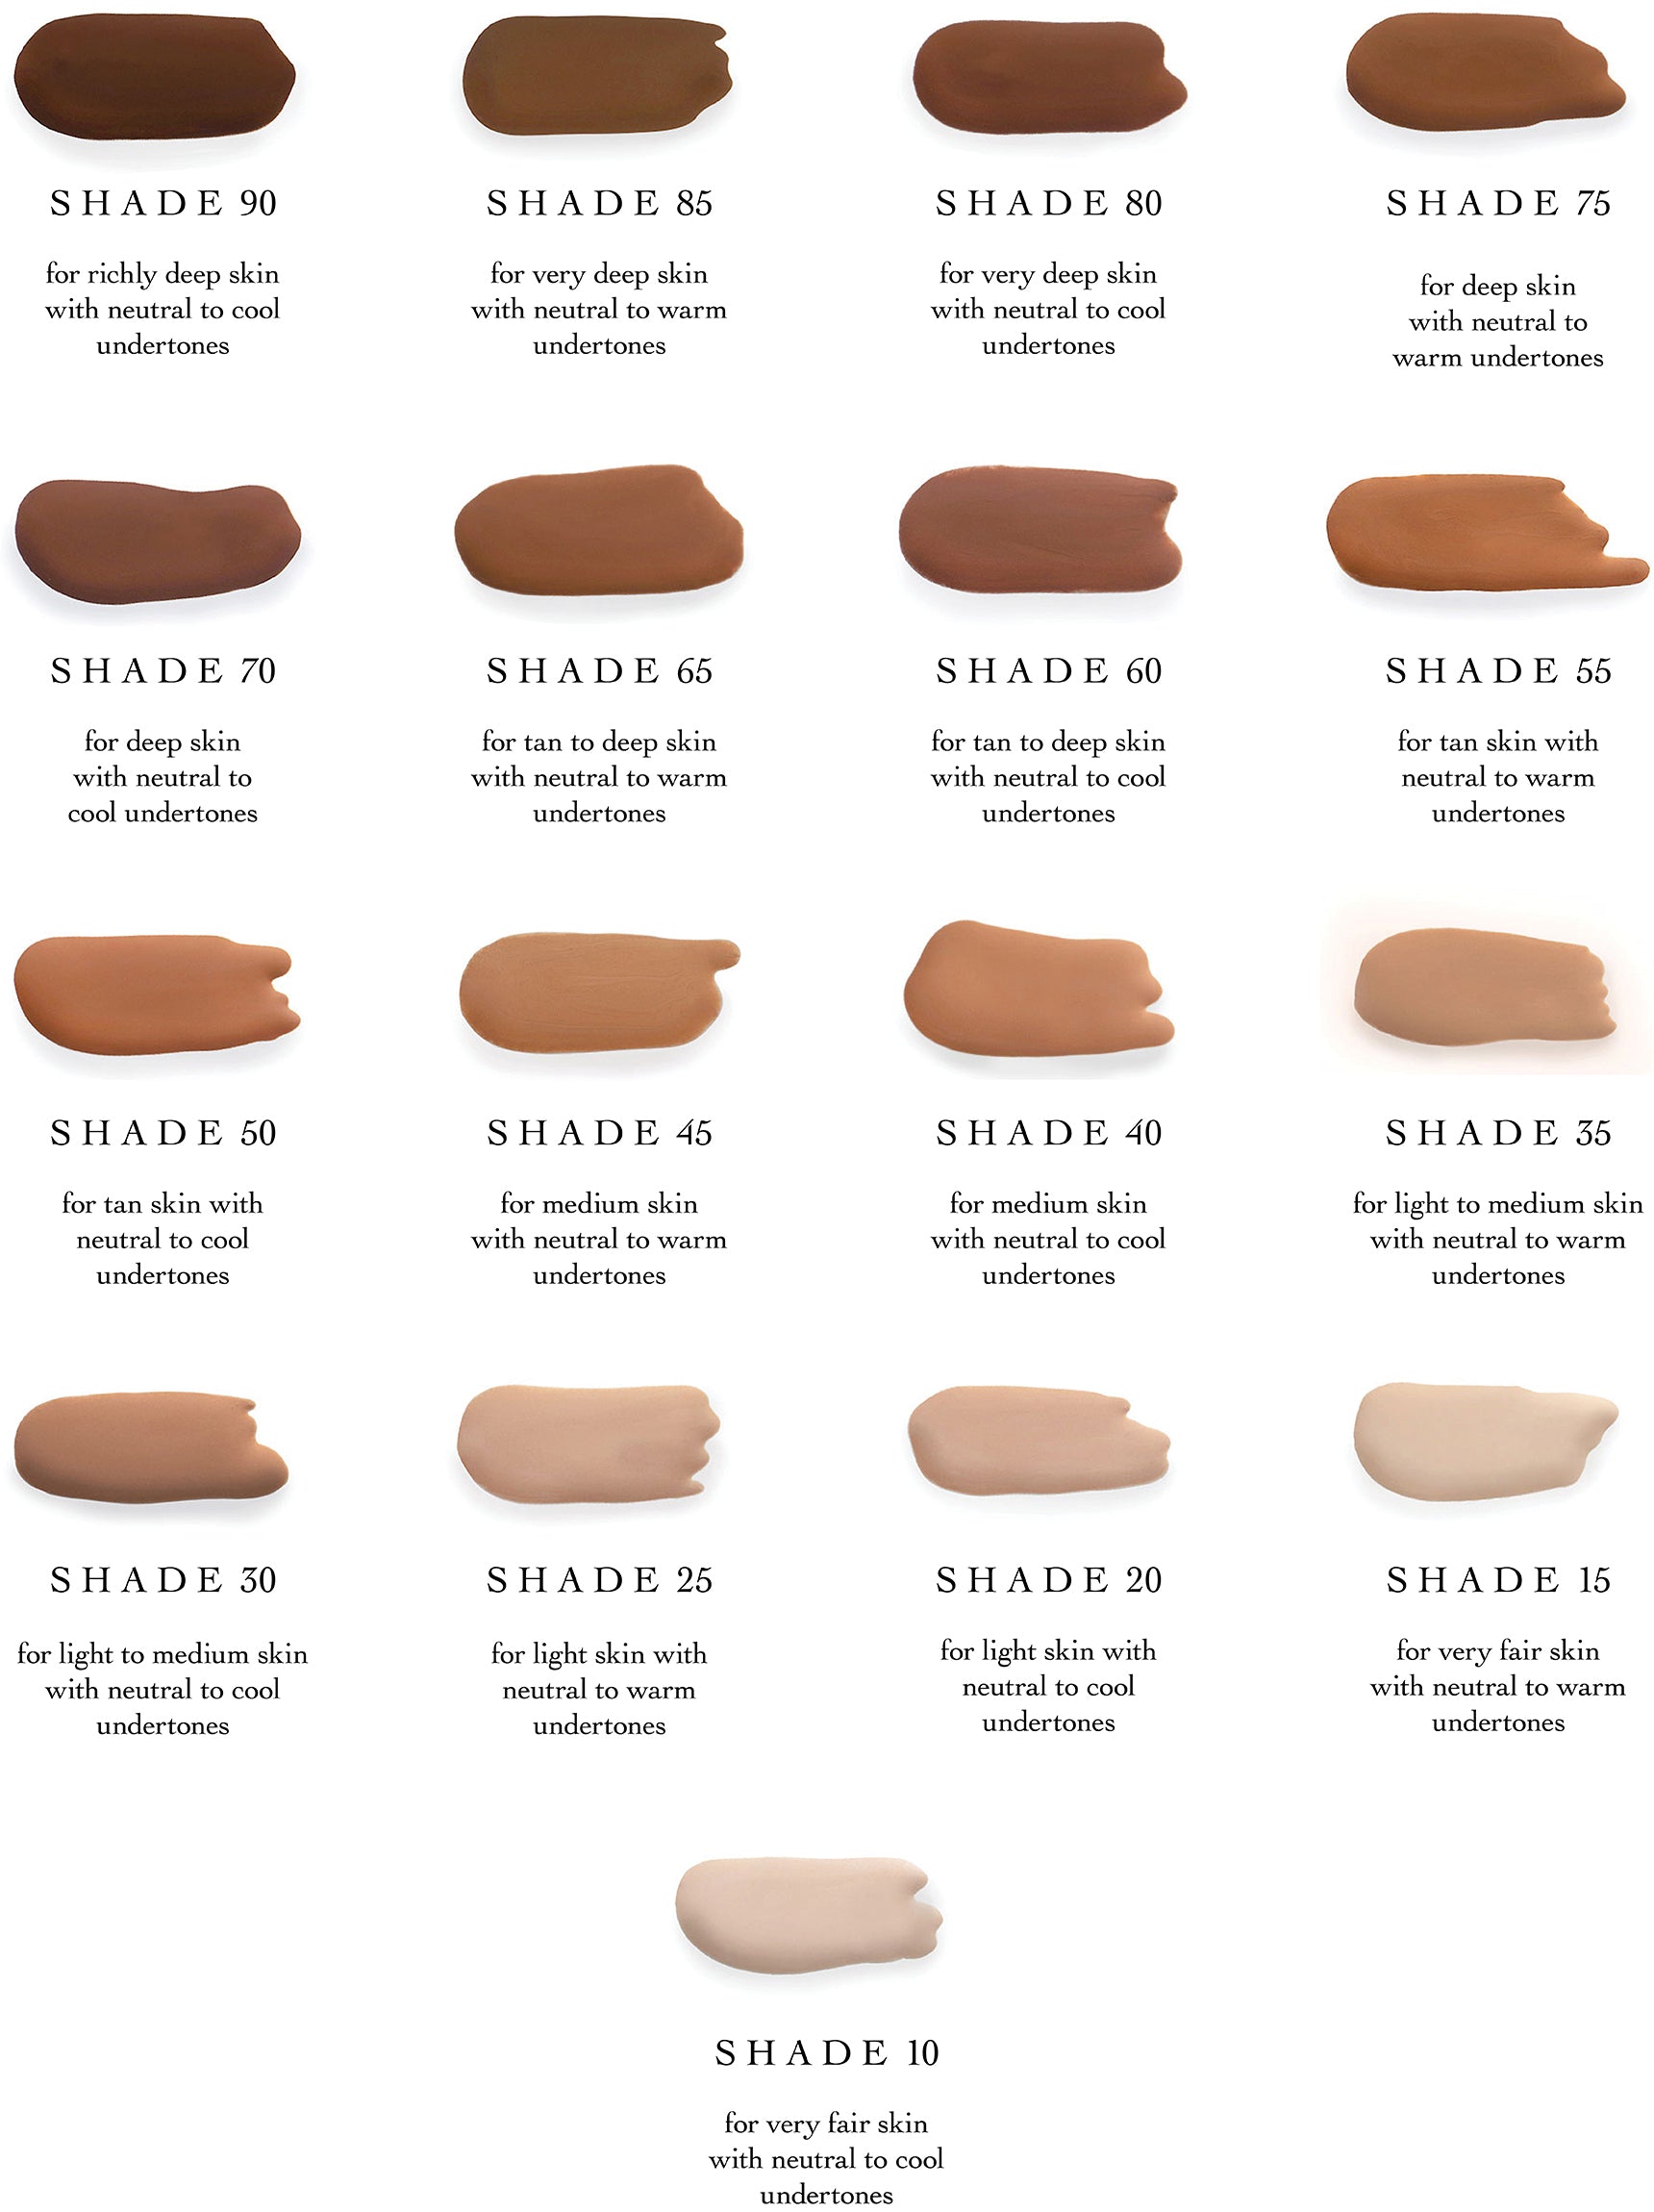 Tinted Oil Serum Foundation all shade color examples shades 10-90